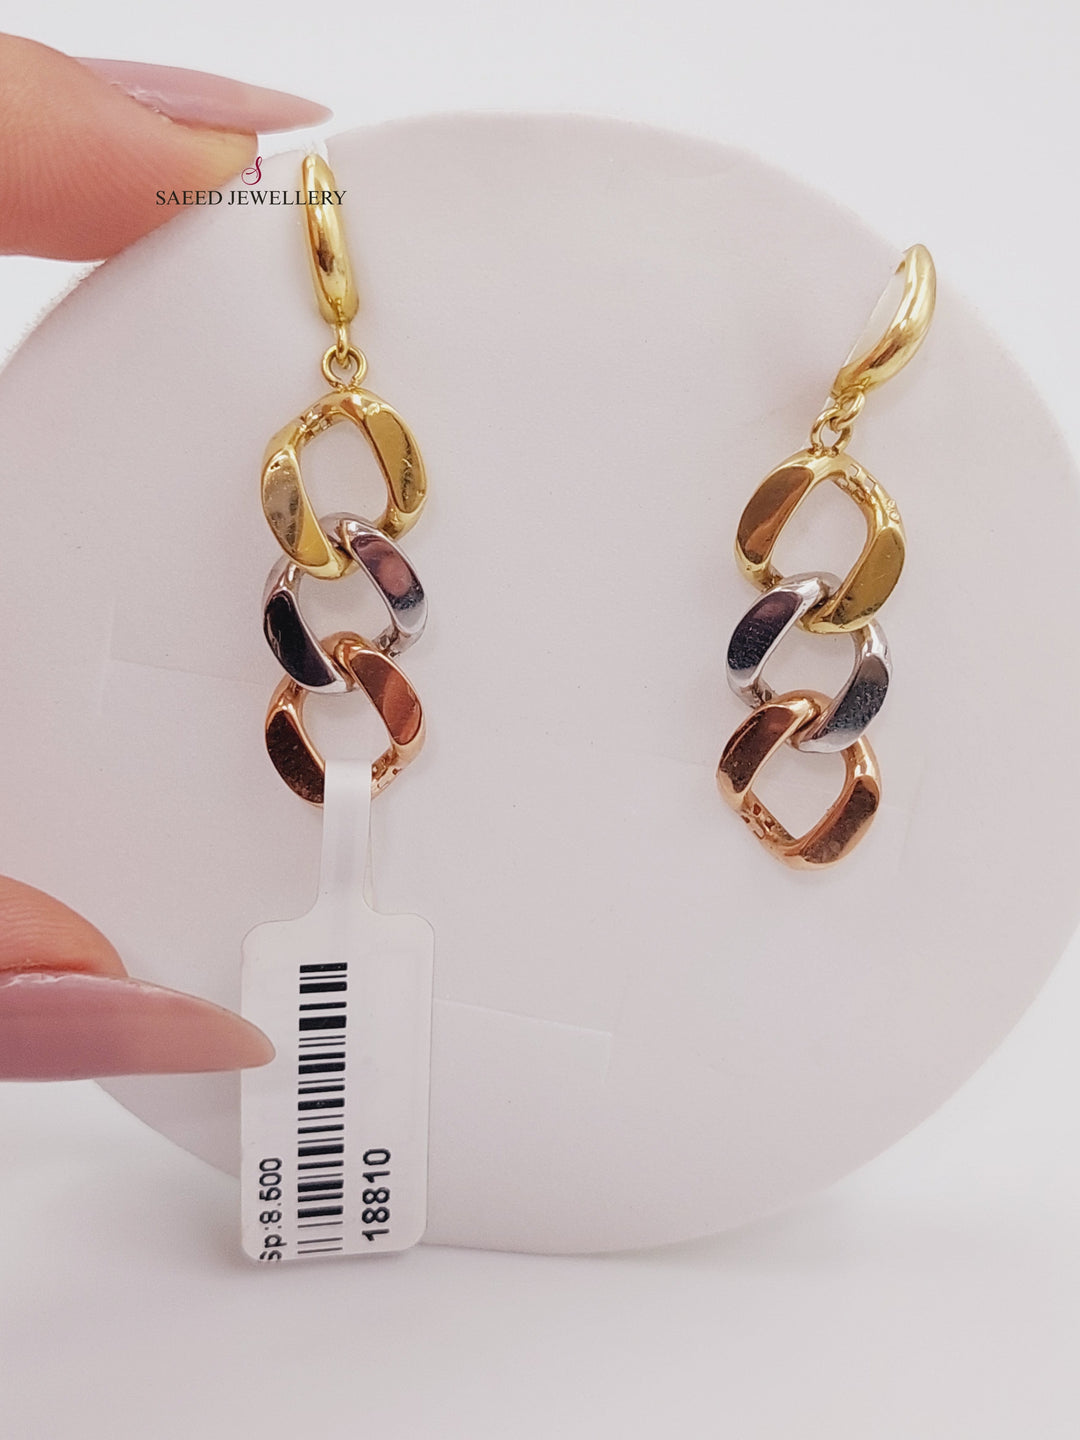 18K Fancy Earrings Made of 18K Yellow Gold by Saeed Jewelry-حلق-اكسترا-26